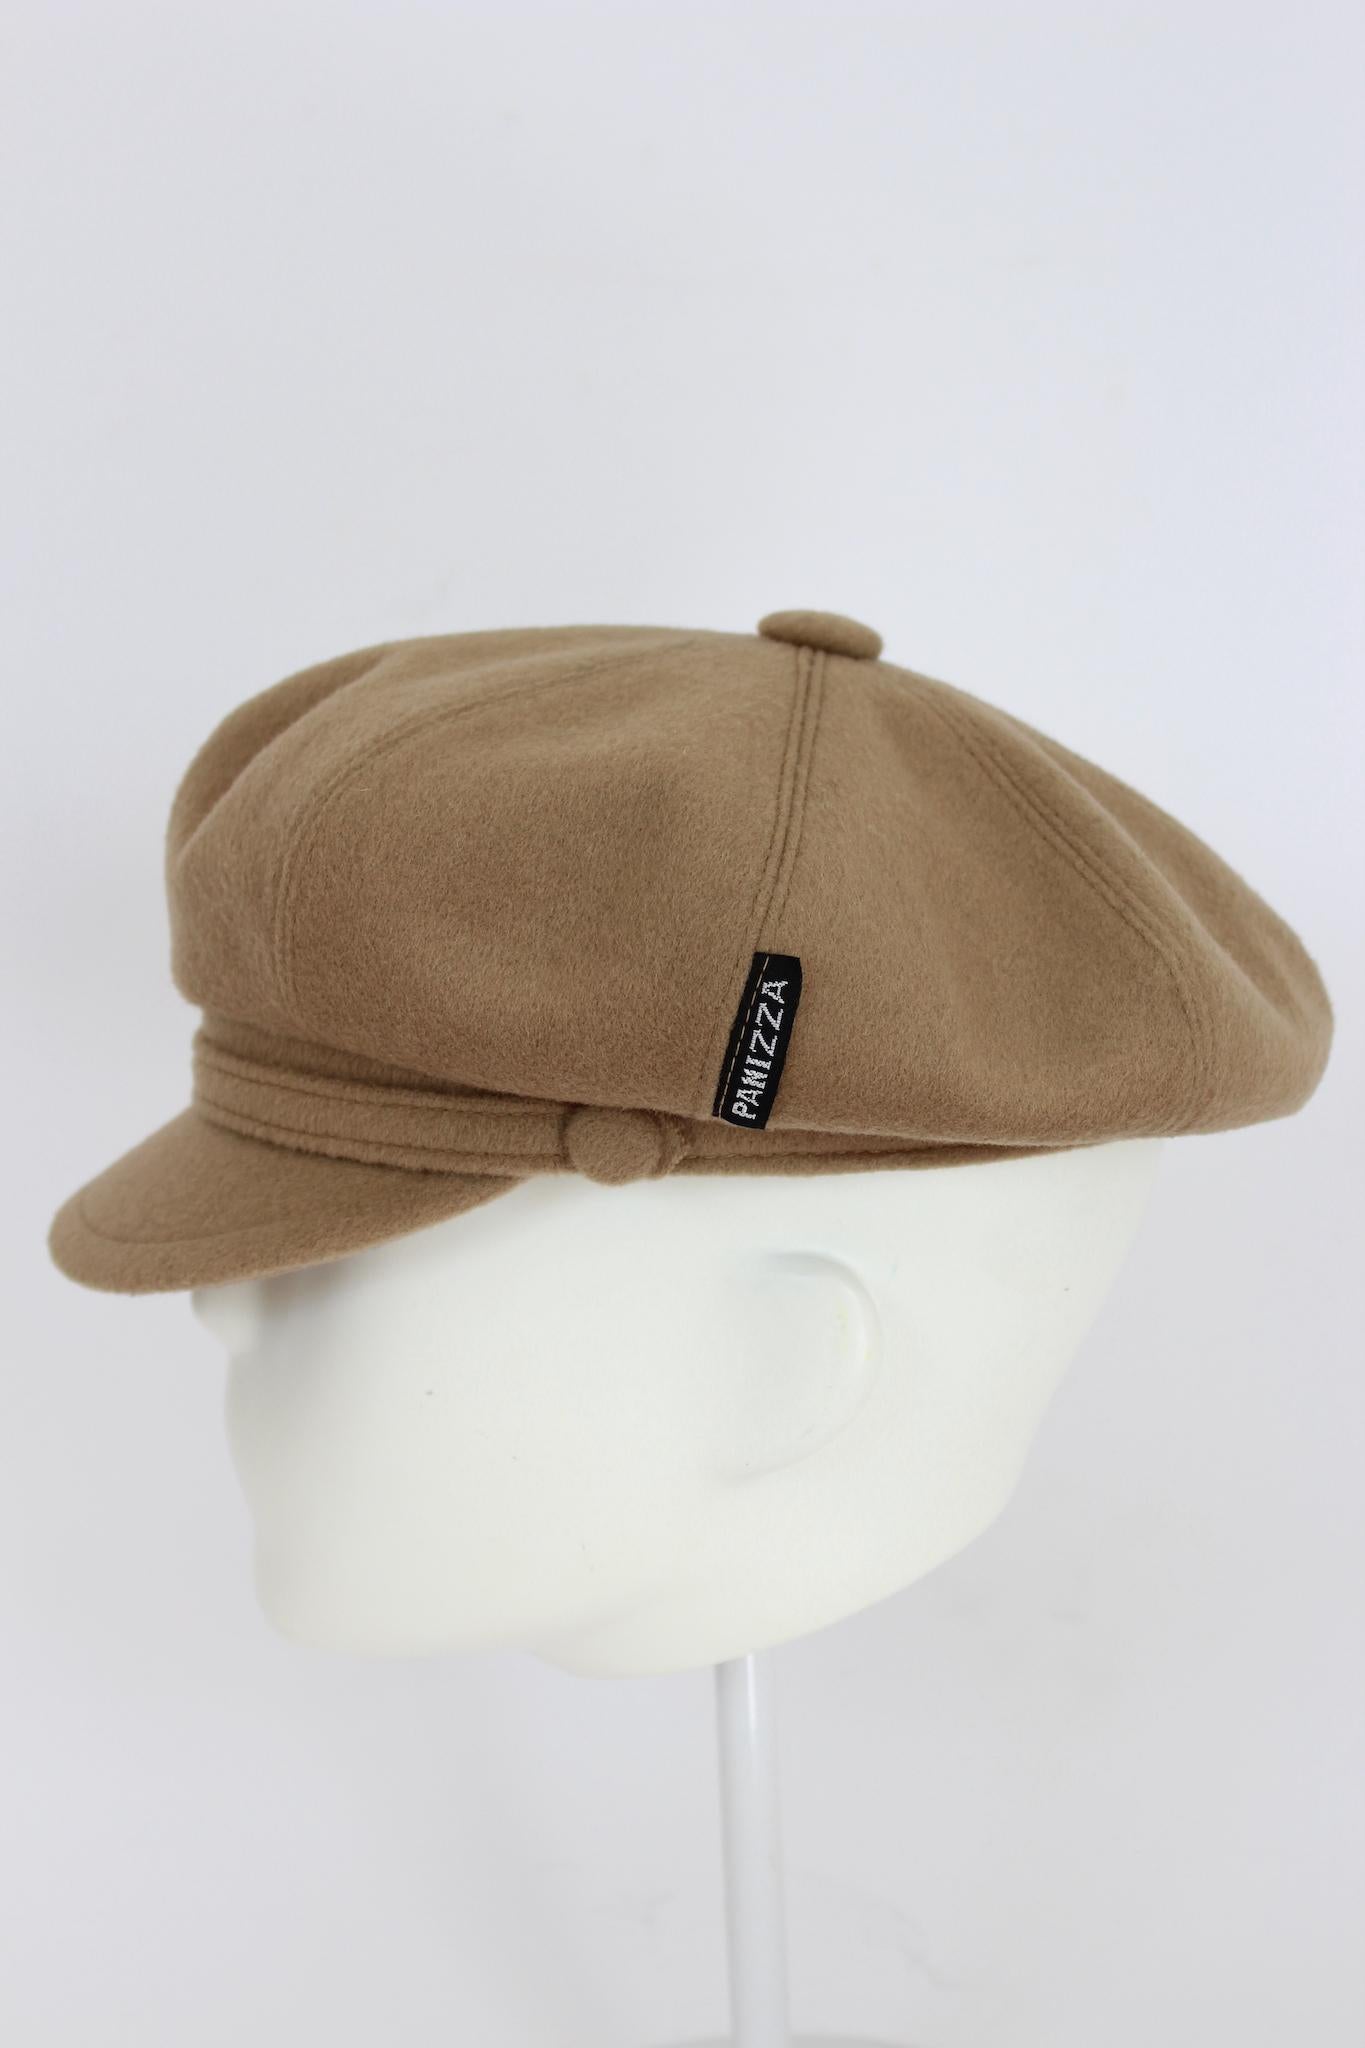 Panizza 80s vintage flat hat. Beige color in wool, soft model with rigid band around the head. Made in Italy.

Size: 57

Circumference: 57 cm
Height: 10 cm